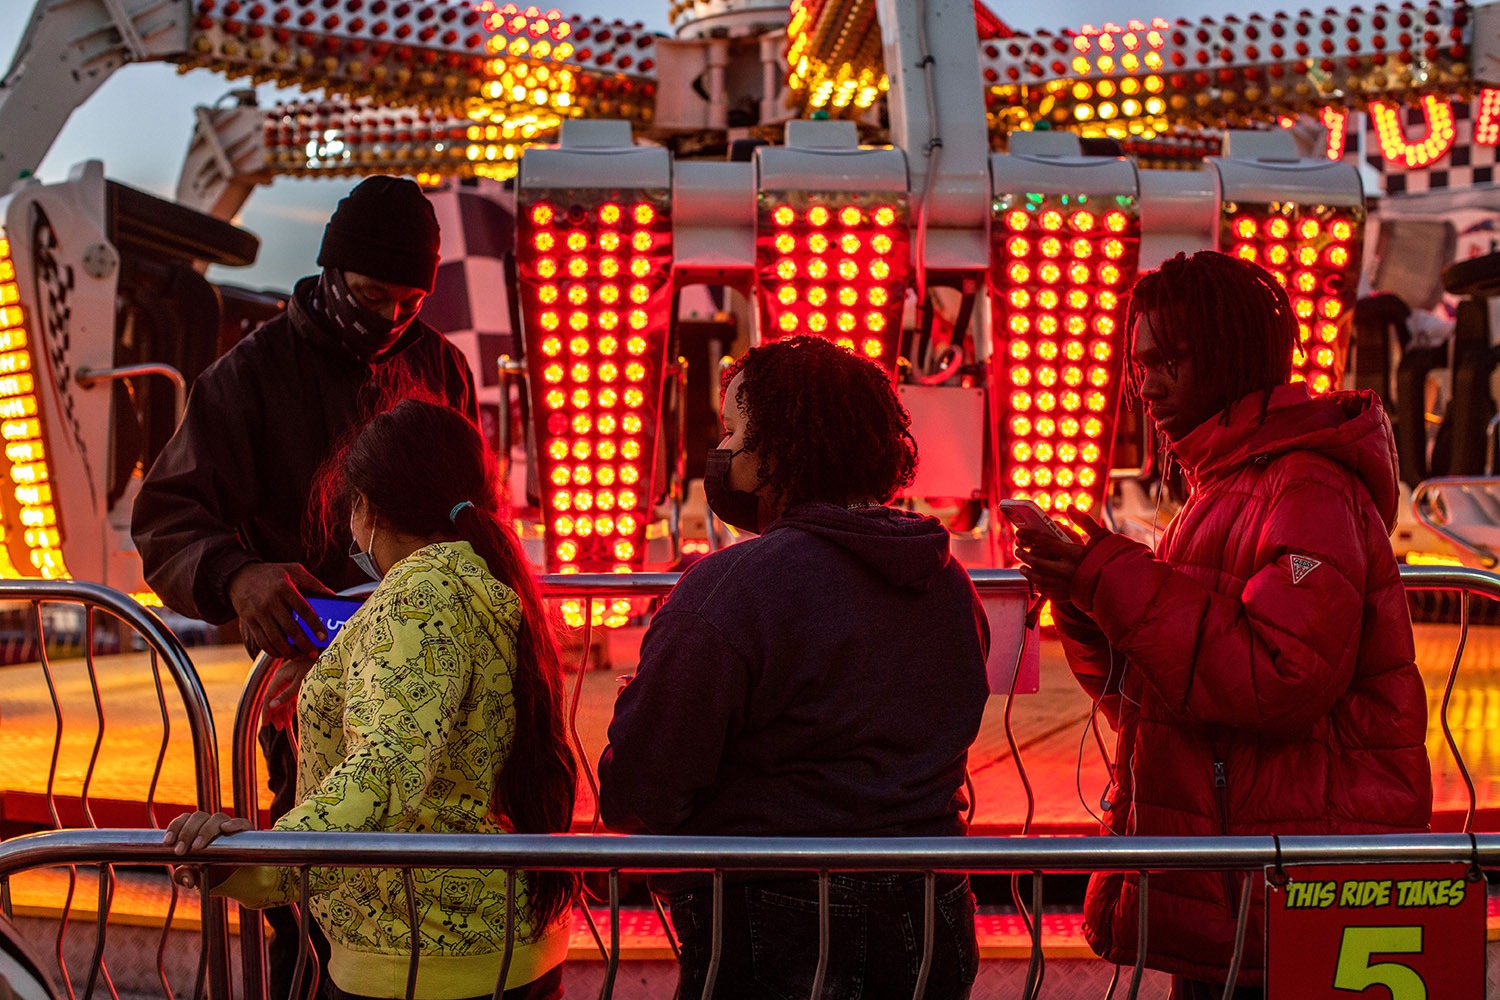 People wait in line for a fair ride at the San Antonio Stock Show and Rodeo carnival on Friday, Feb. 18, 2022. Photo by Kaylee Greenlee Beal | Heron contributor